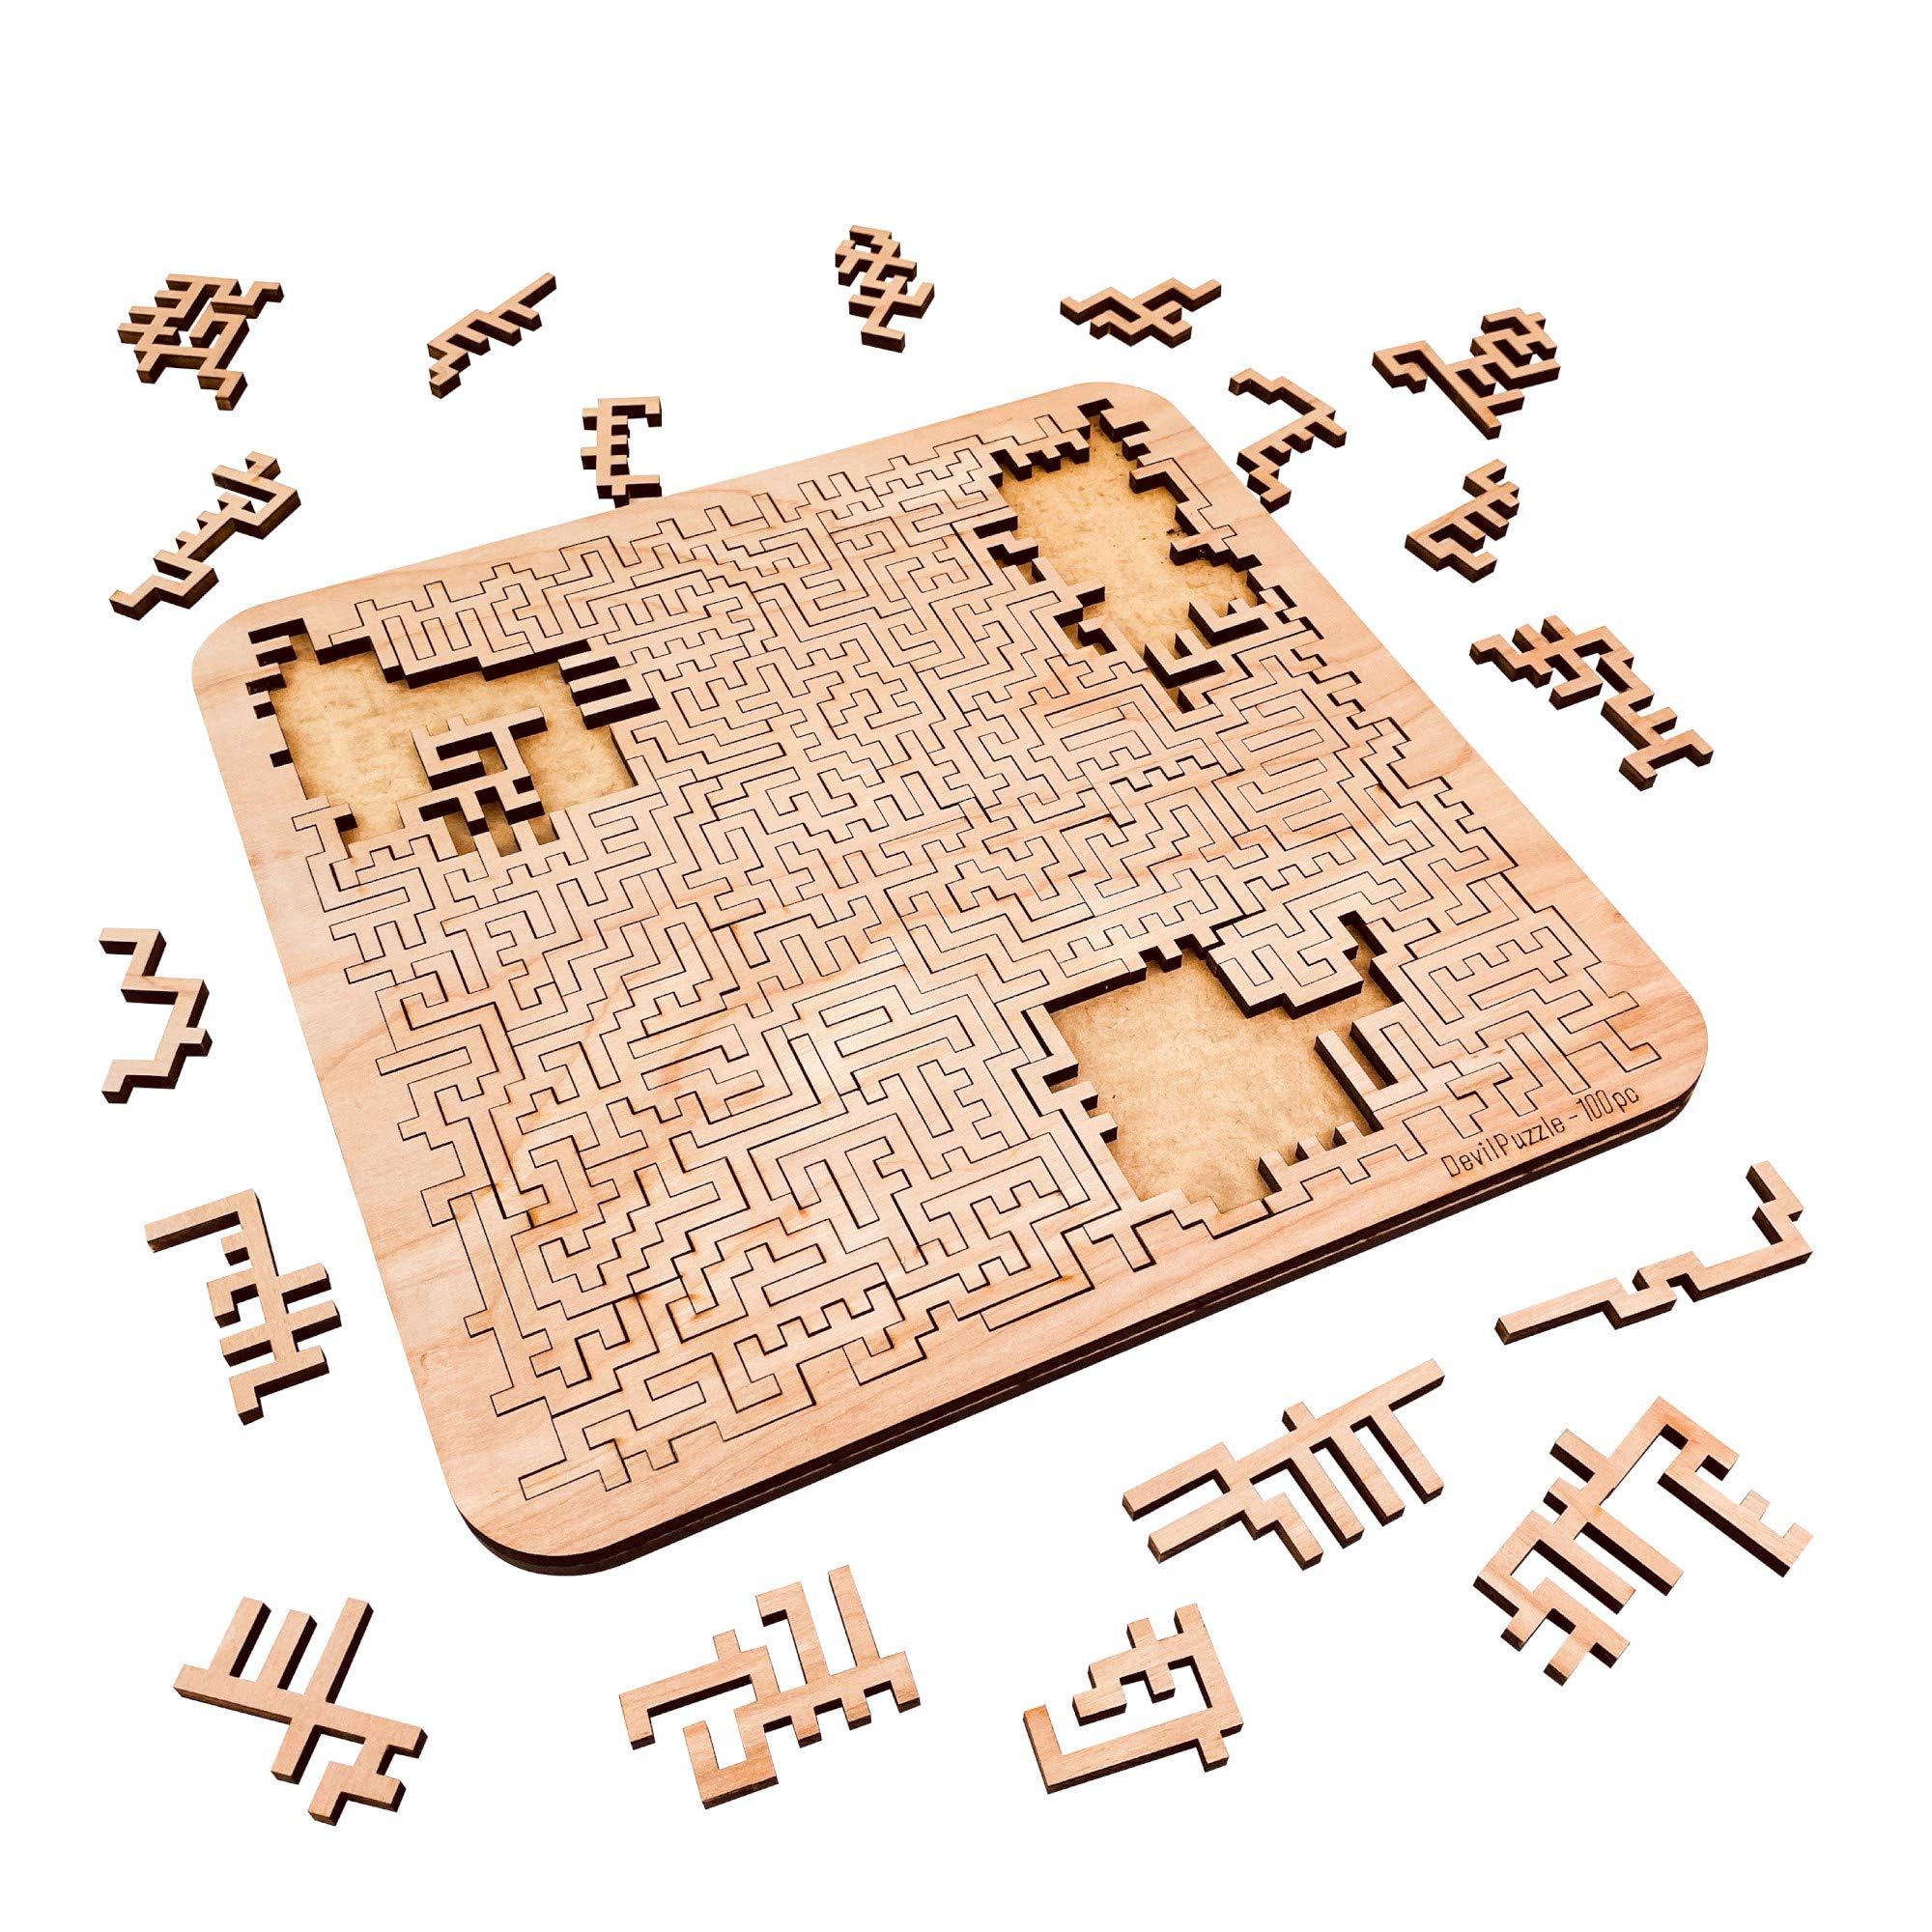 Torched Products Puzzle Hard (100 pieces) Mind Bending Aztec Labyrinth Puzzle